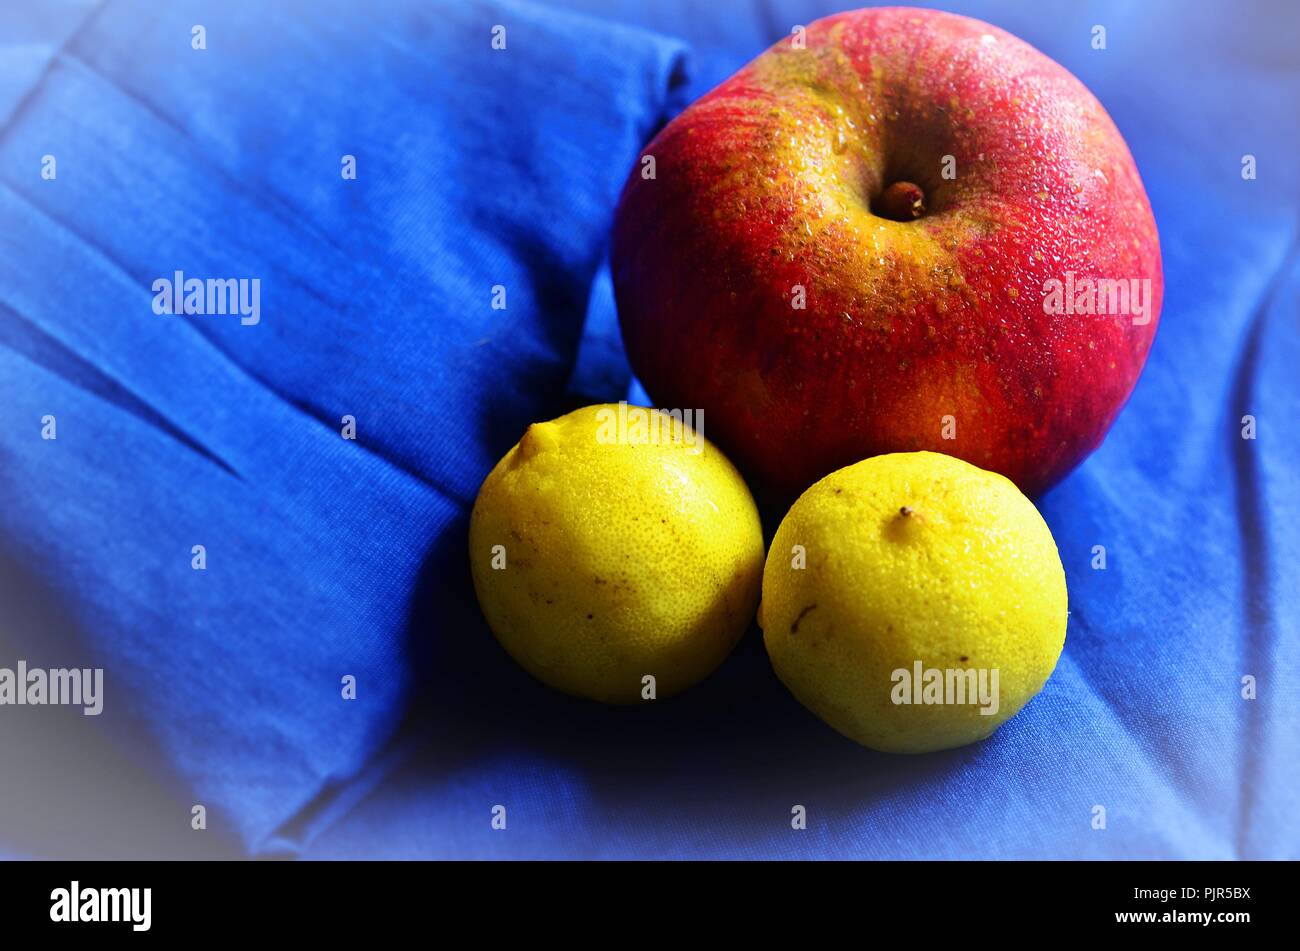 Red sweating apple with two ripe lemons, kept on a blue shirt Stock Photo